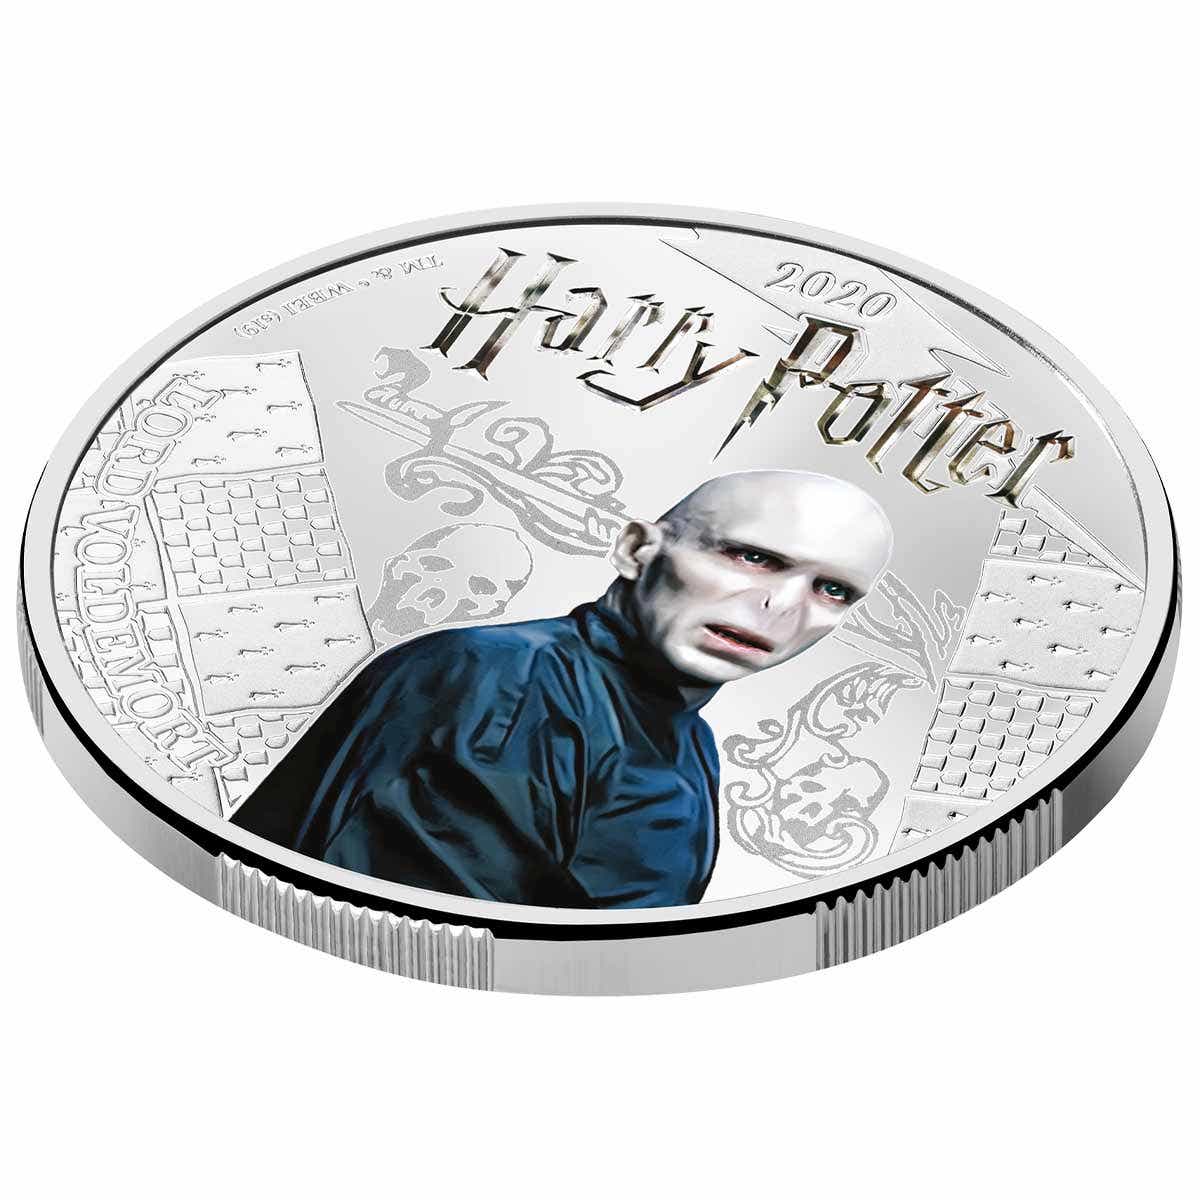 Voldemort 2020 Half Dollar Silver Plated Prooflike Coin